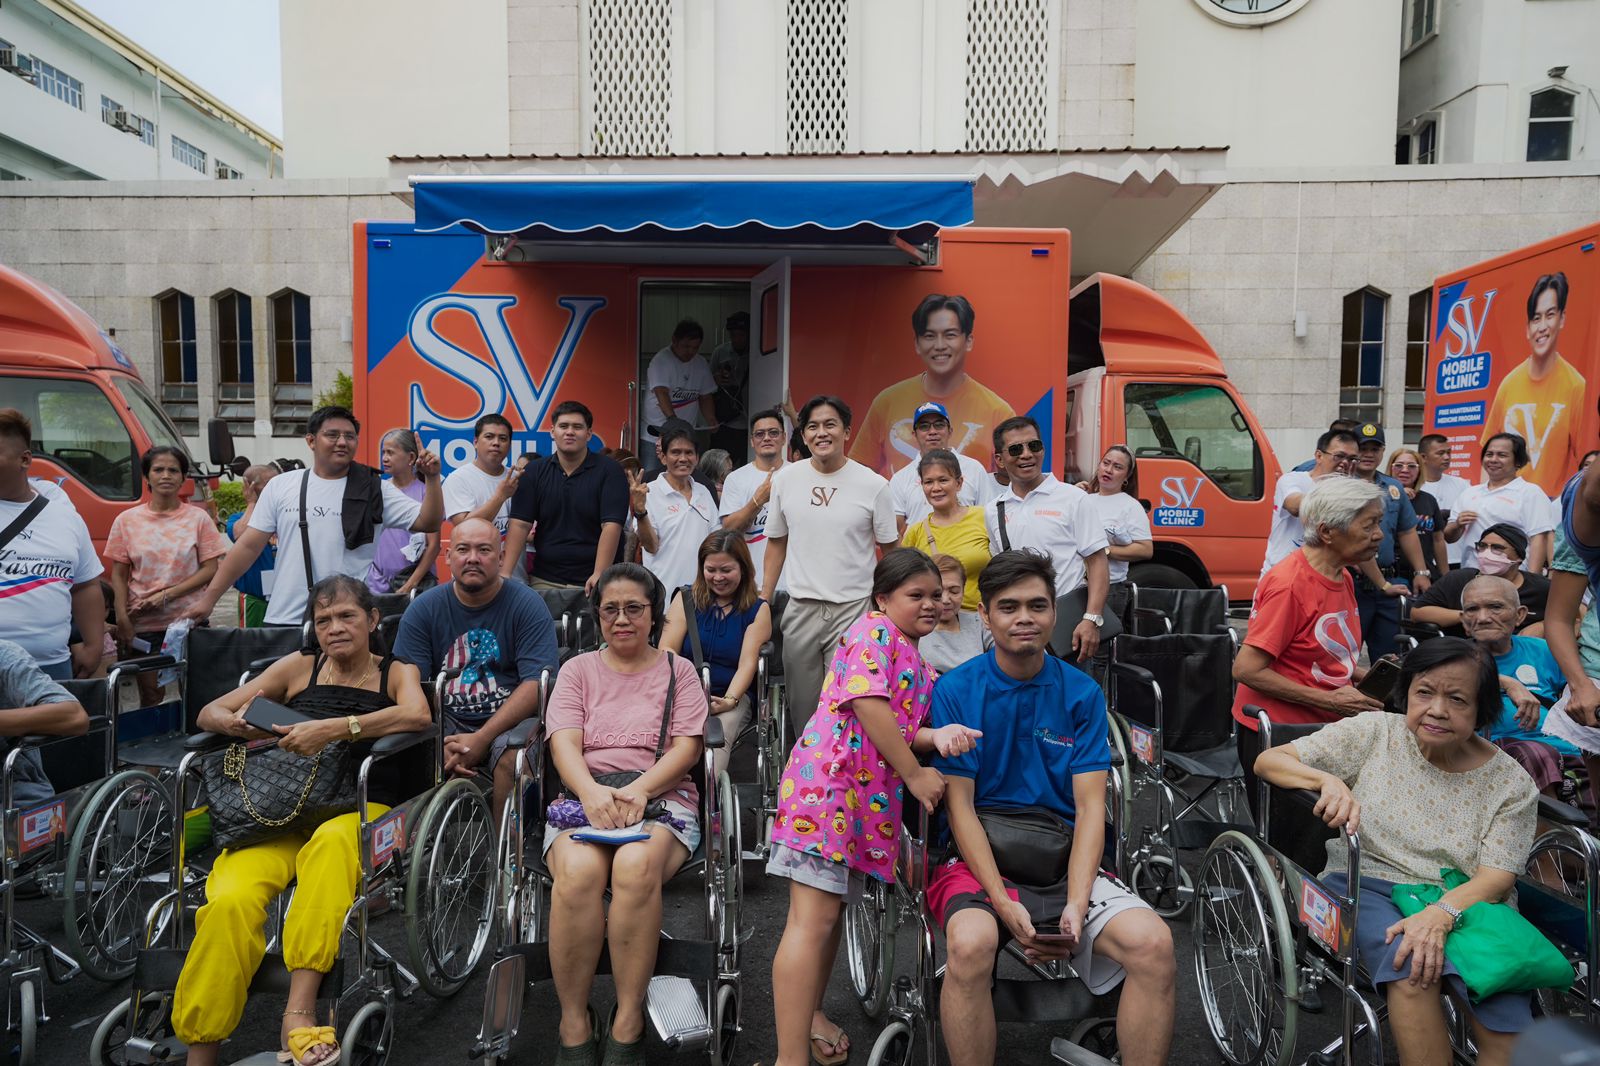 On the significant occasion of Philippine Independence Day, Sam “SV” Verzosa launched a series of initiatives to support the people of Sampaloc.